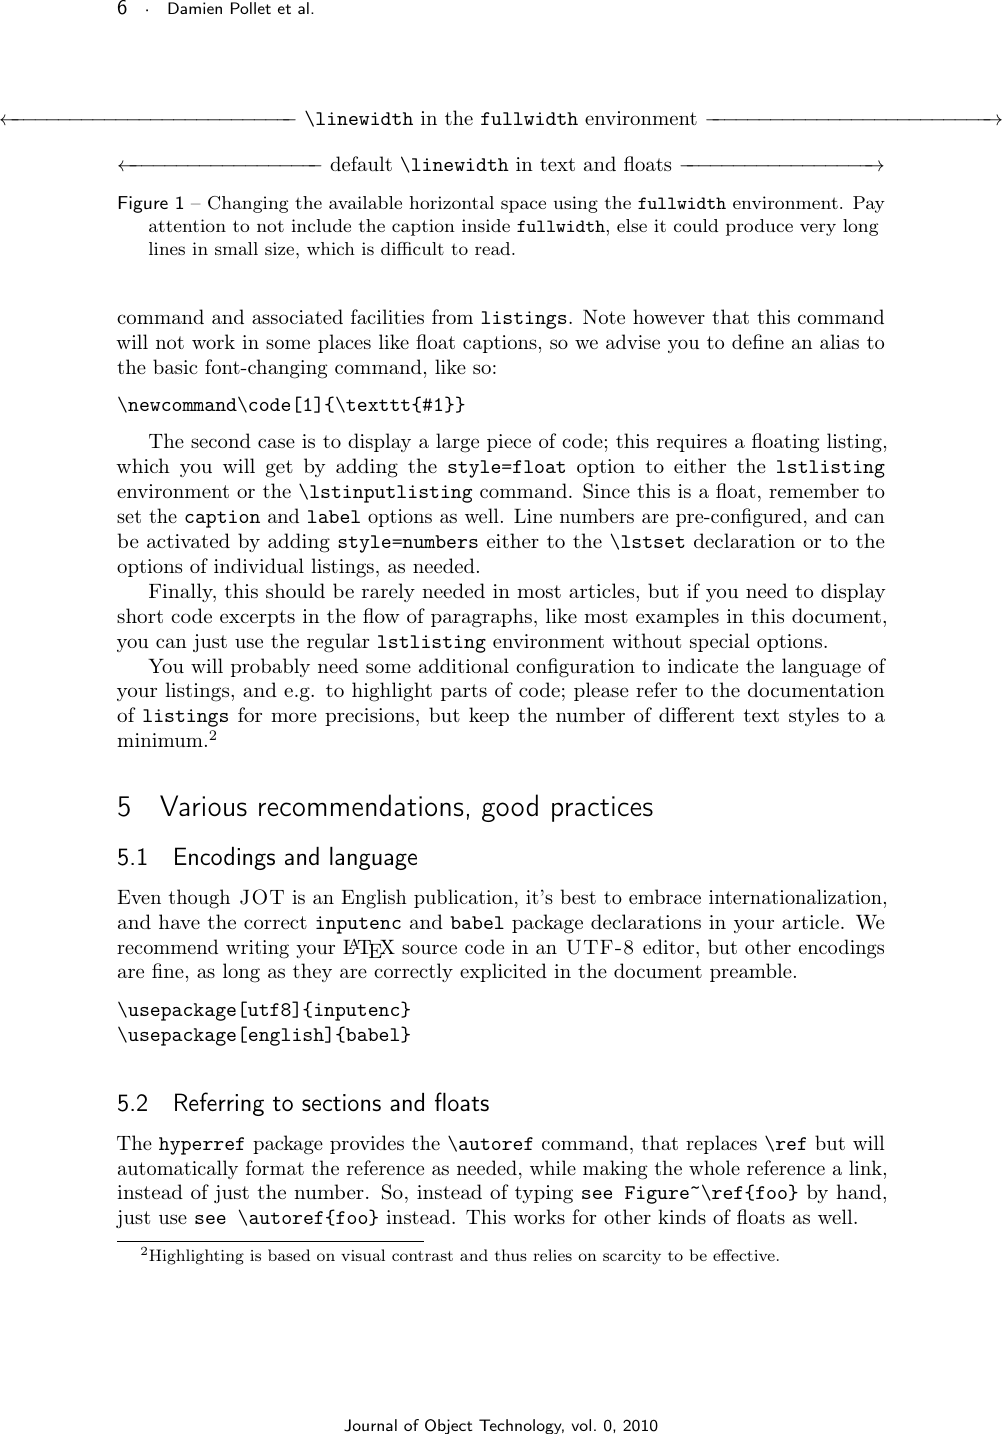 Page 6 of 8 - Typesetting Guidelines For JOT Jot-manual